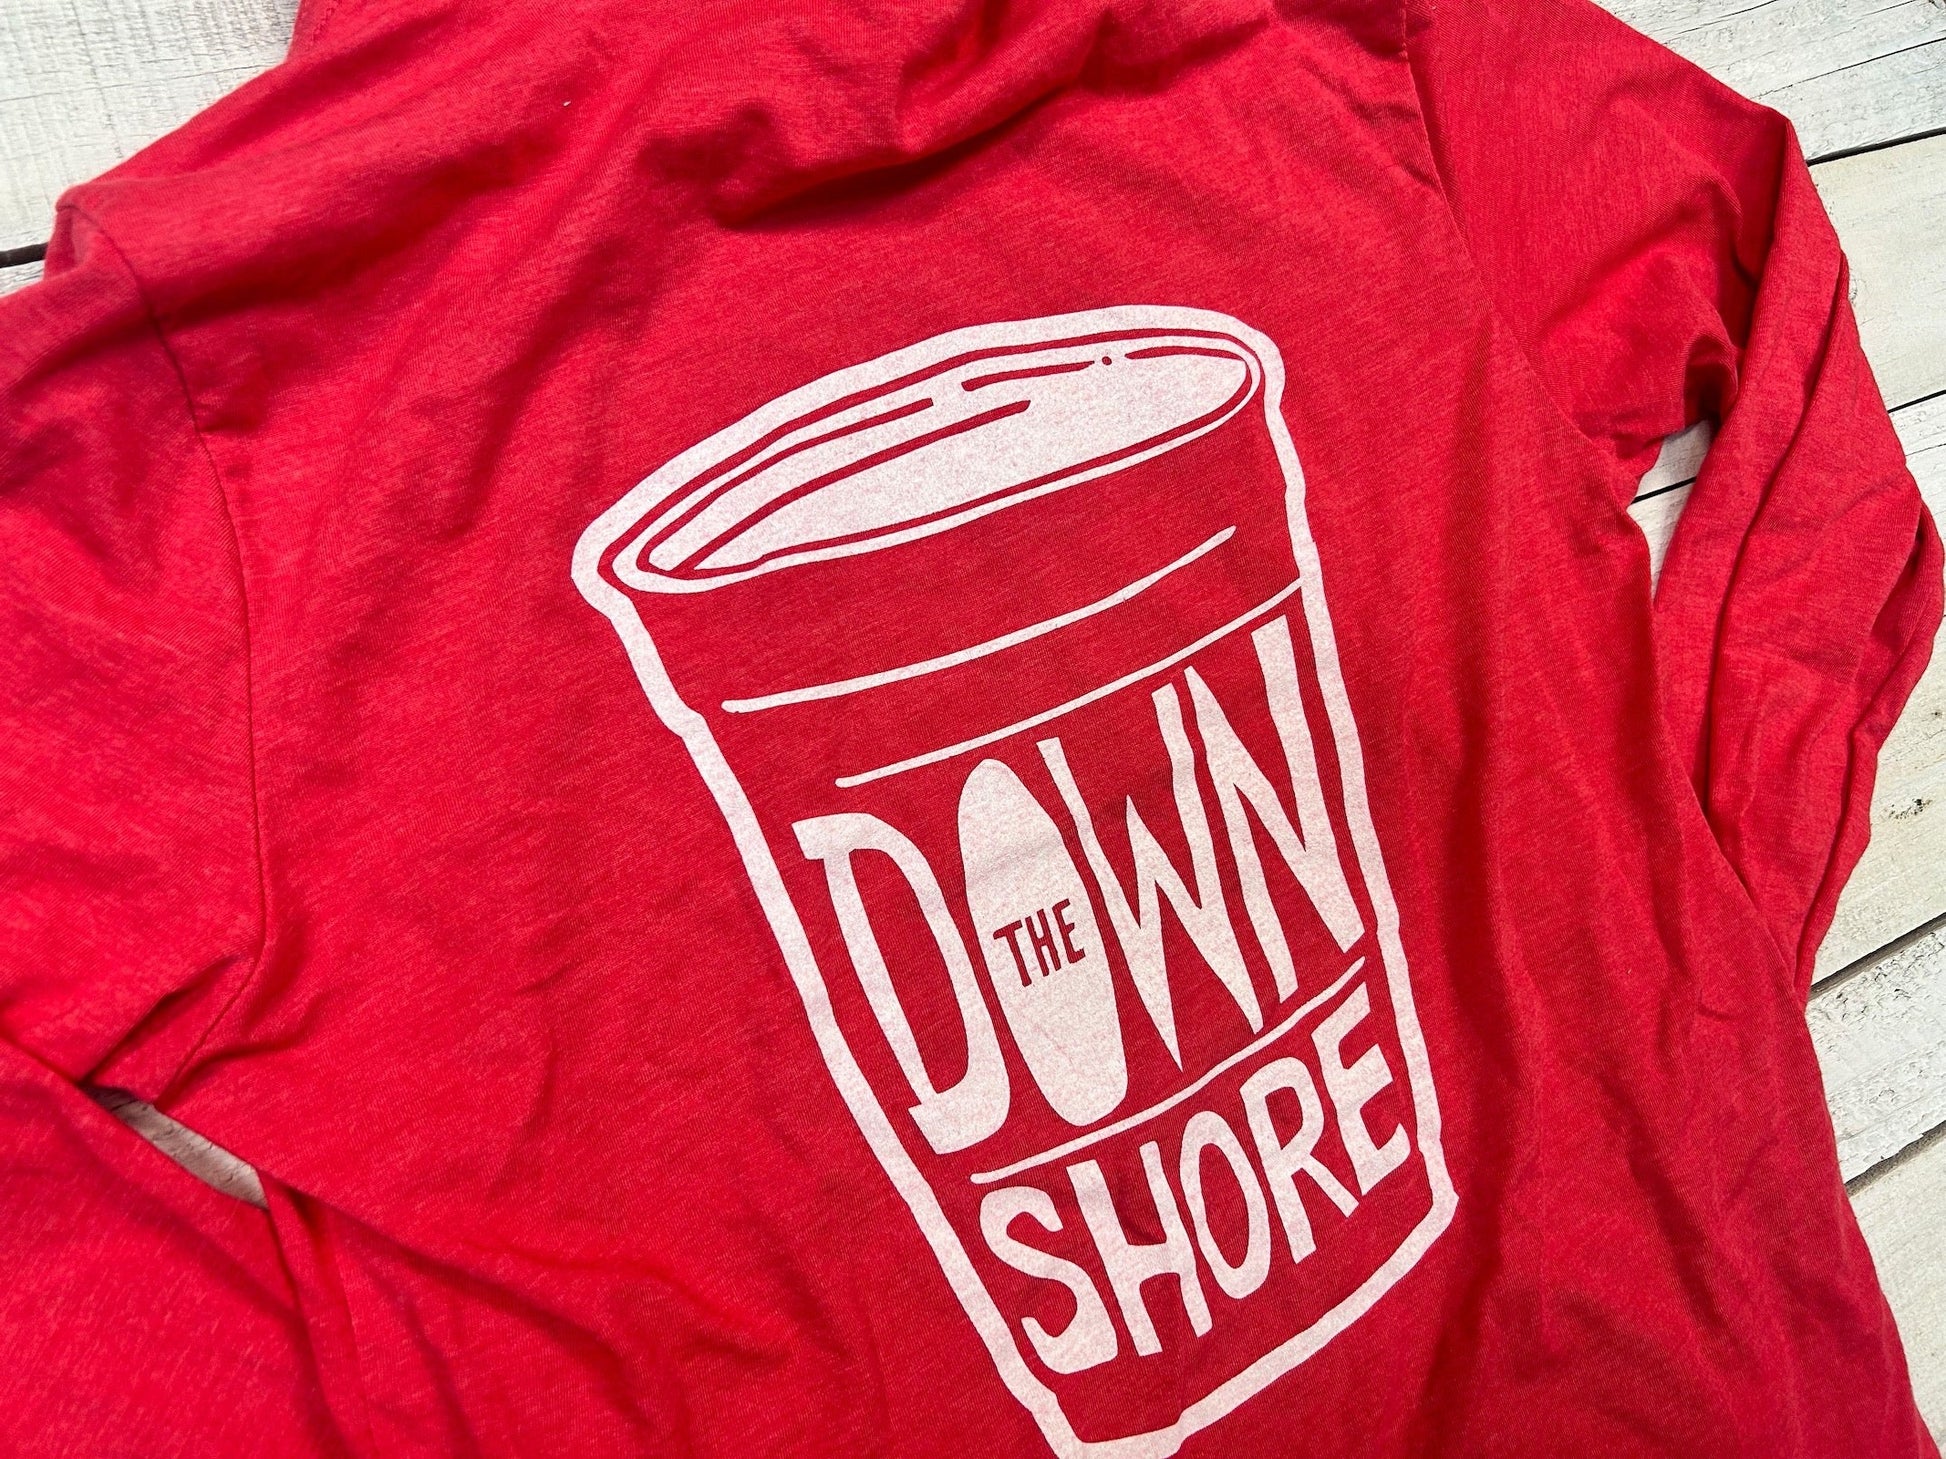 BlueRooted Down The Shore Solo Cup Hooded Long Sleever